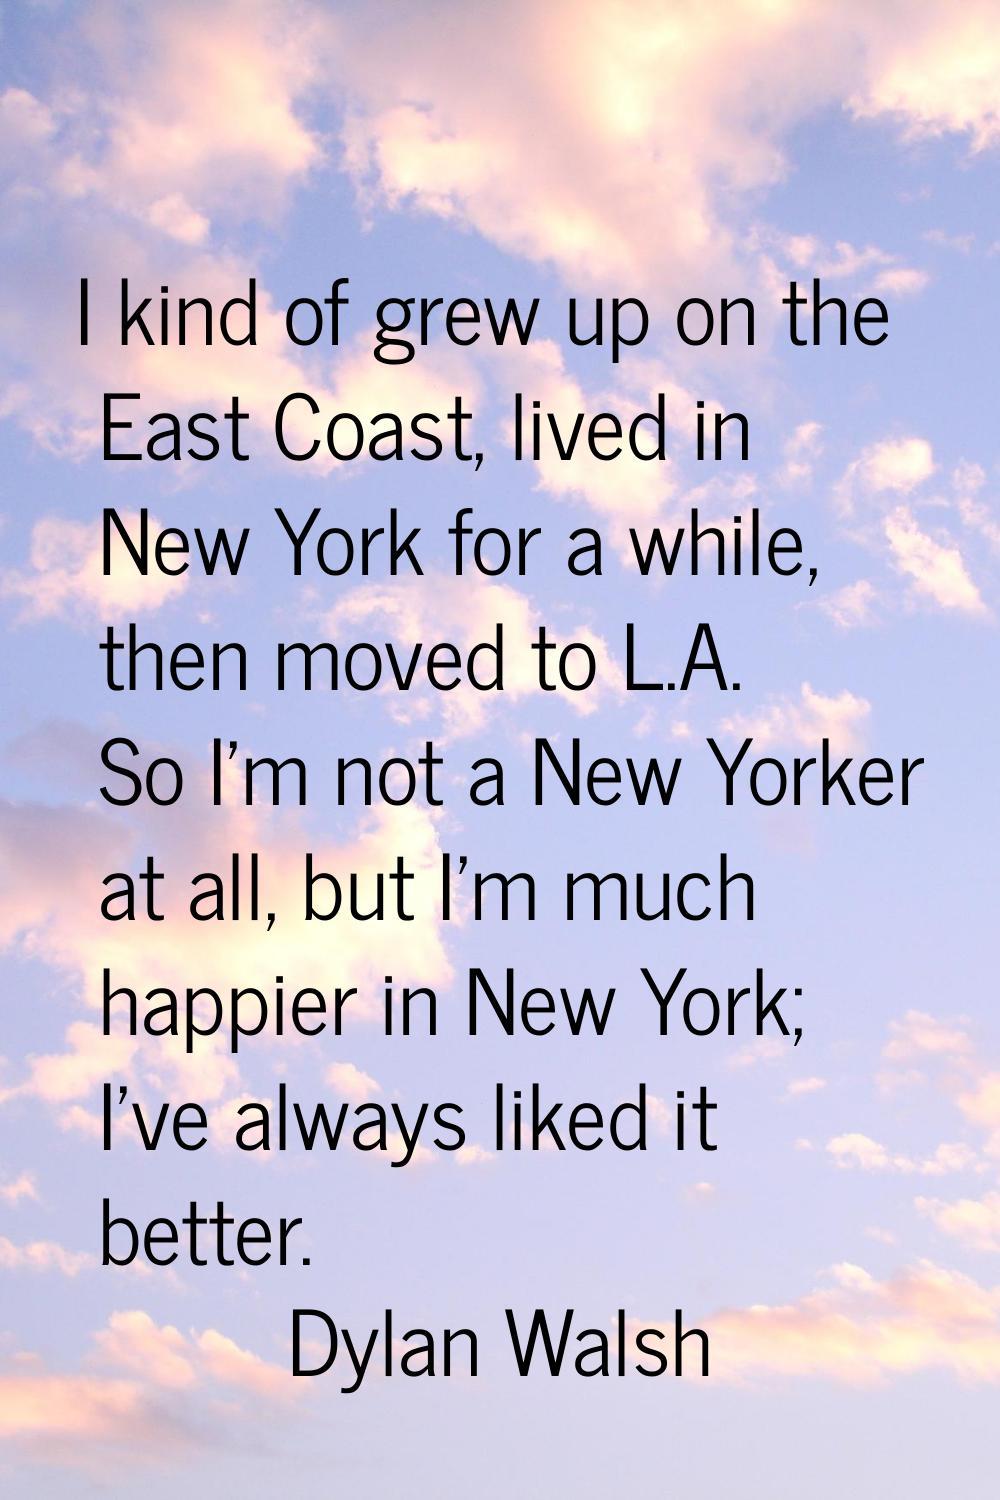 I kind of grew up on the East Coast, lived in New York for a while, then moved to L.A. So I'm not a